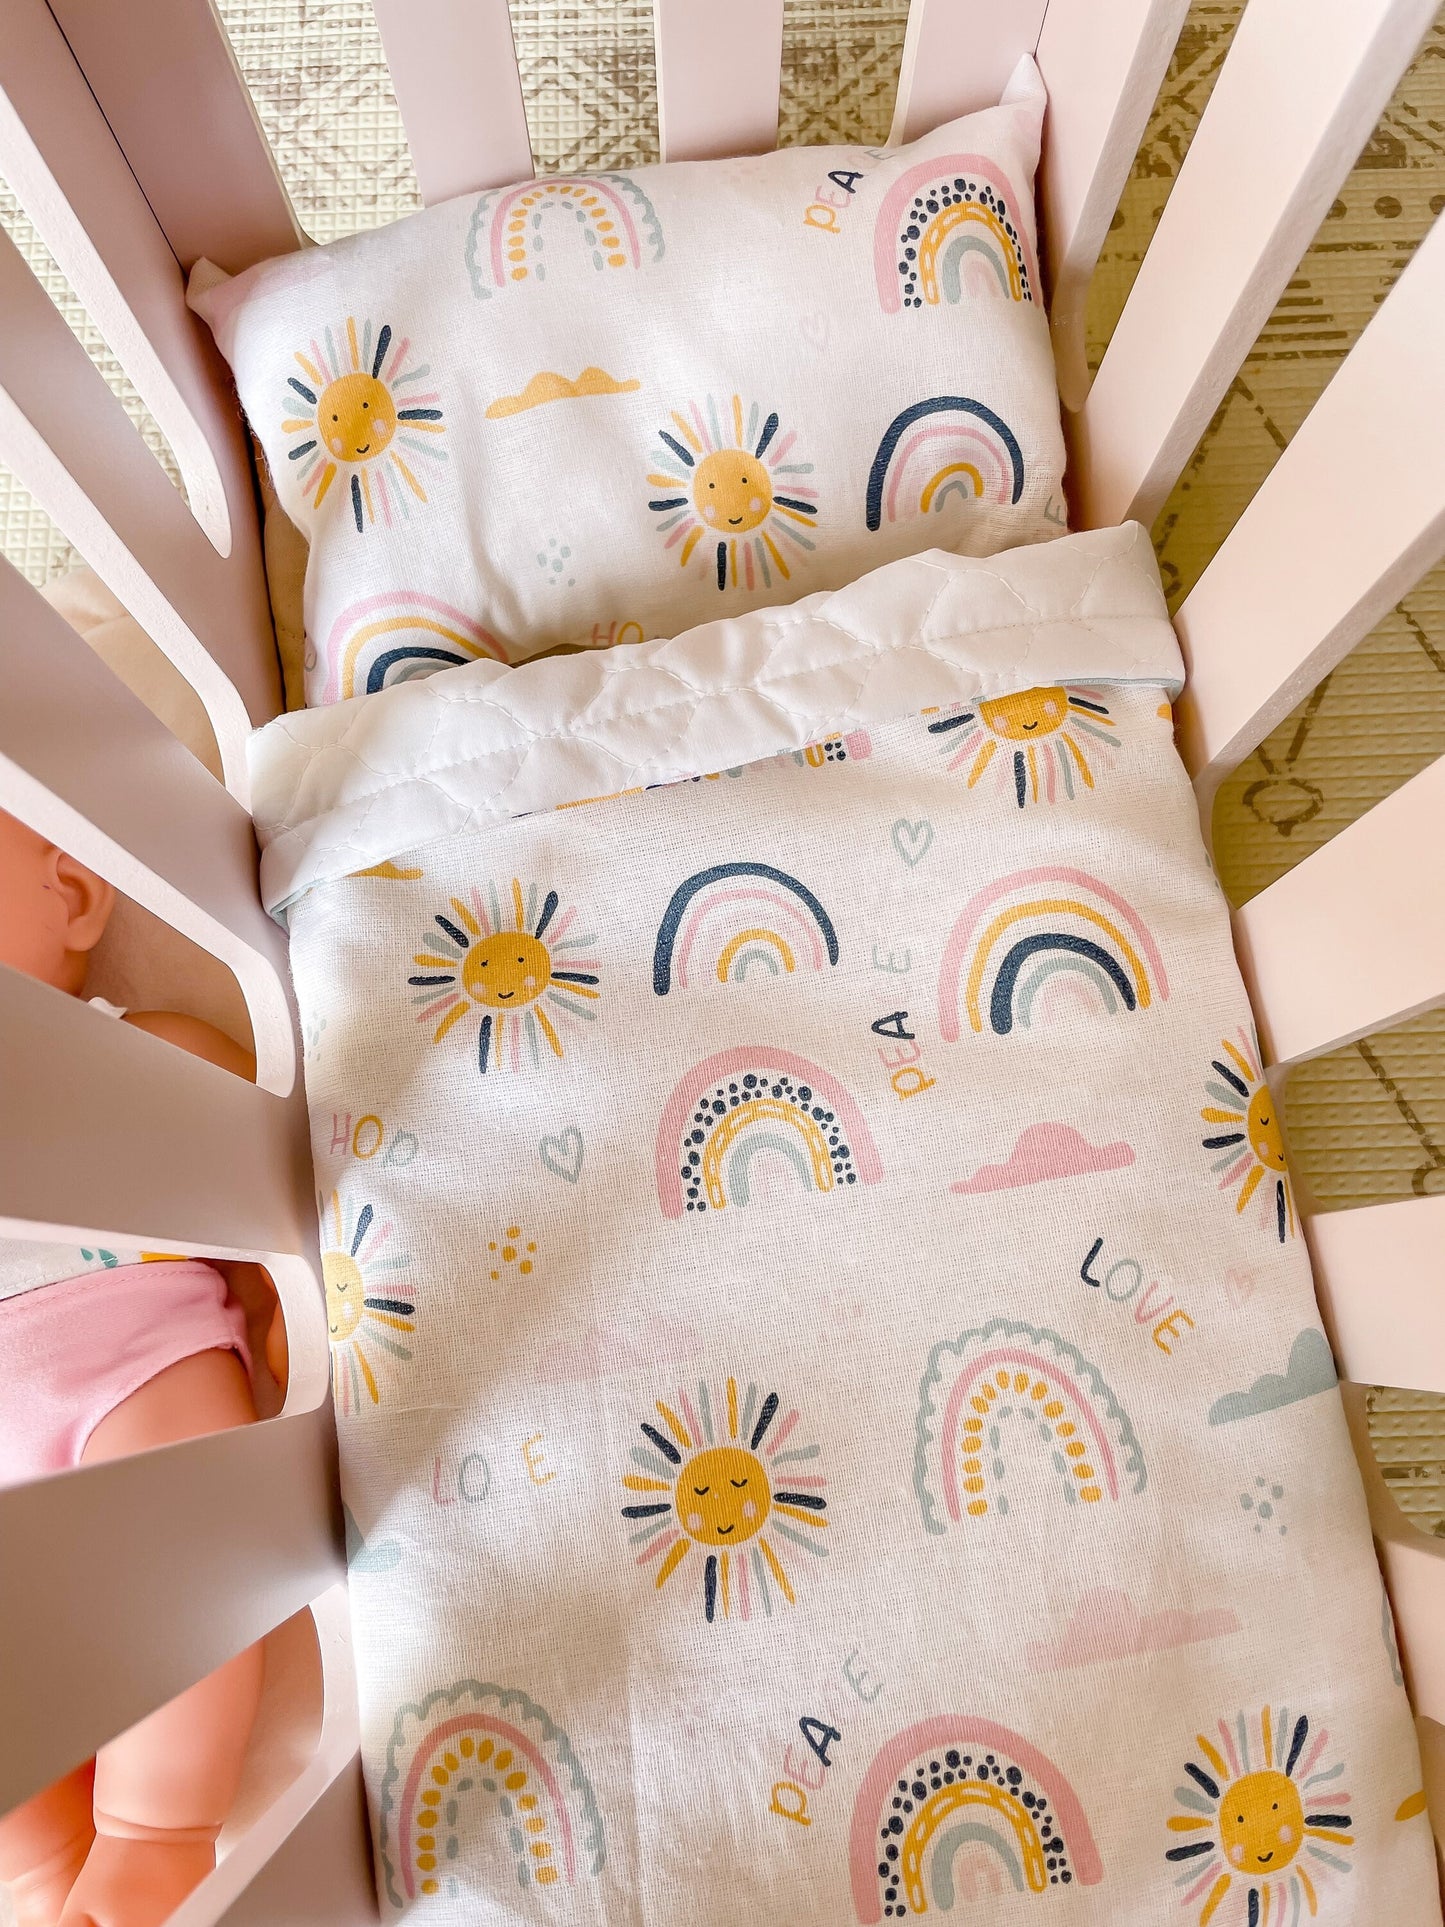 Doll Pram Bedding | Quality Bed Set | First Birthday Gift For Granddaughter | Role Play Set | Doll Cot Blanket | Kmart Ikea Toy Bedlinen